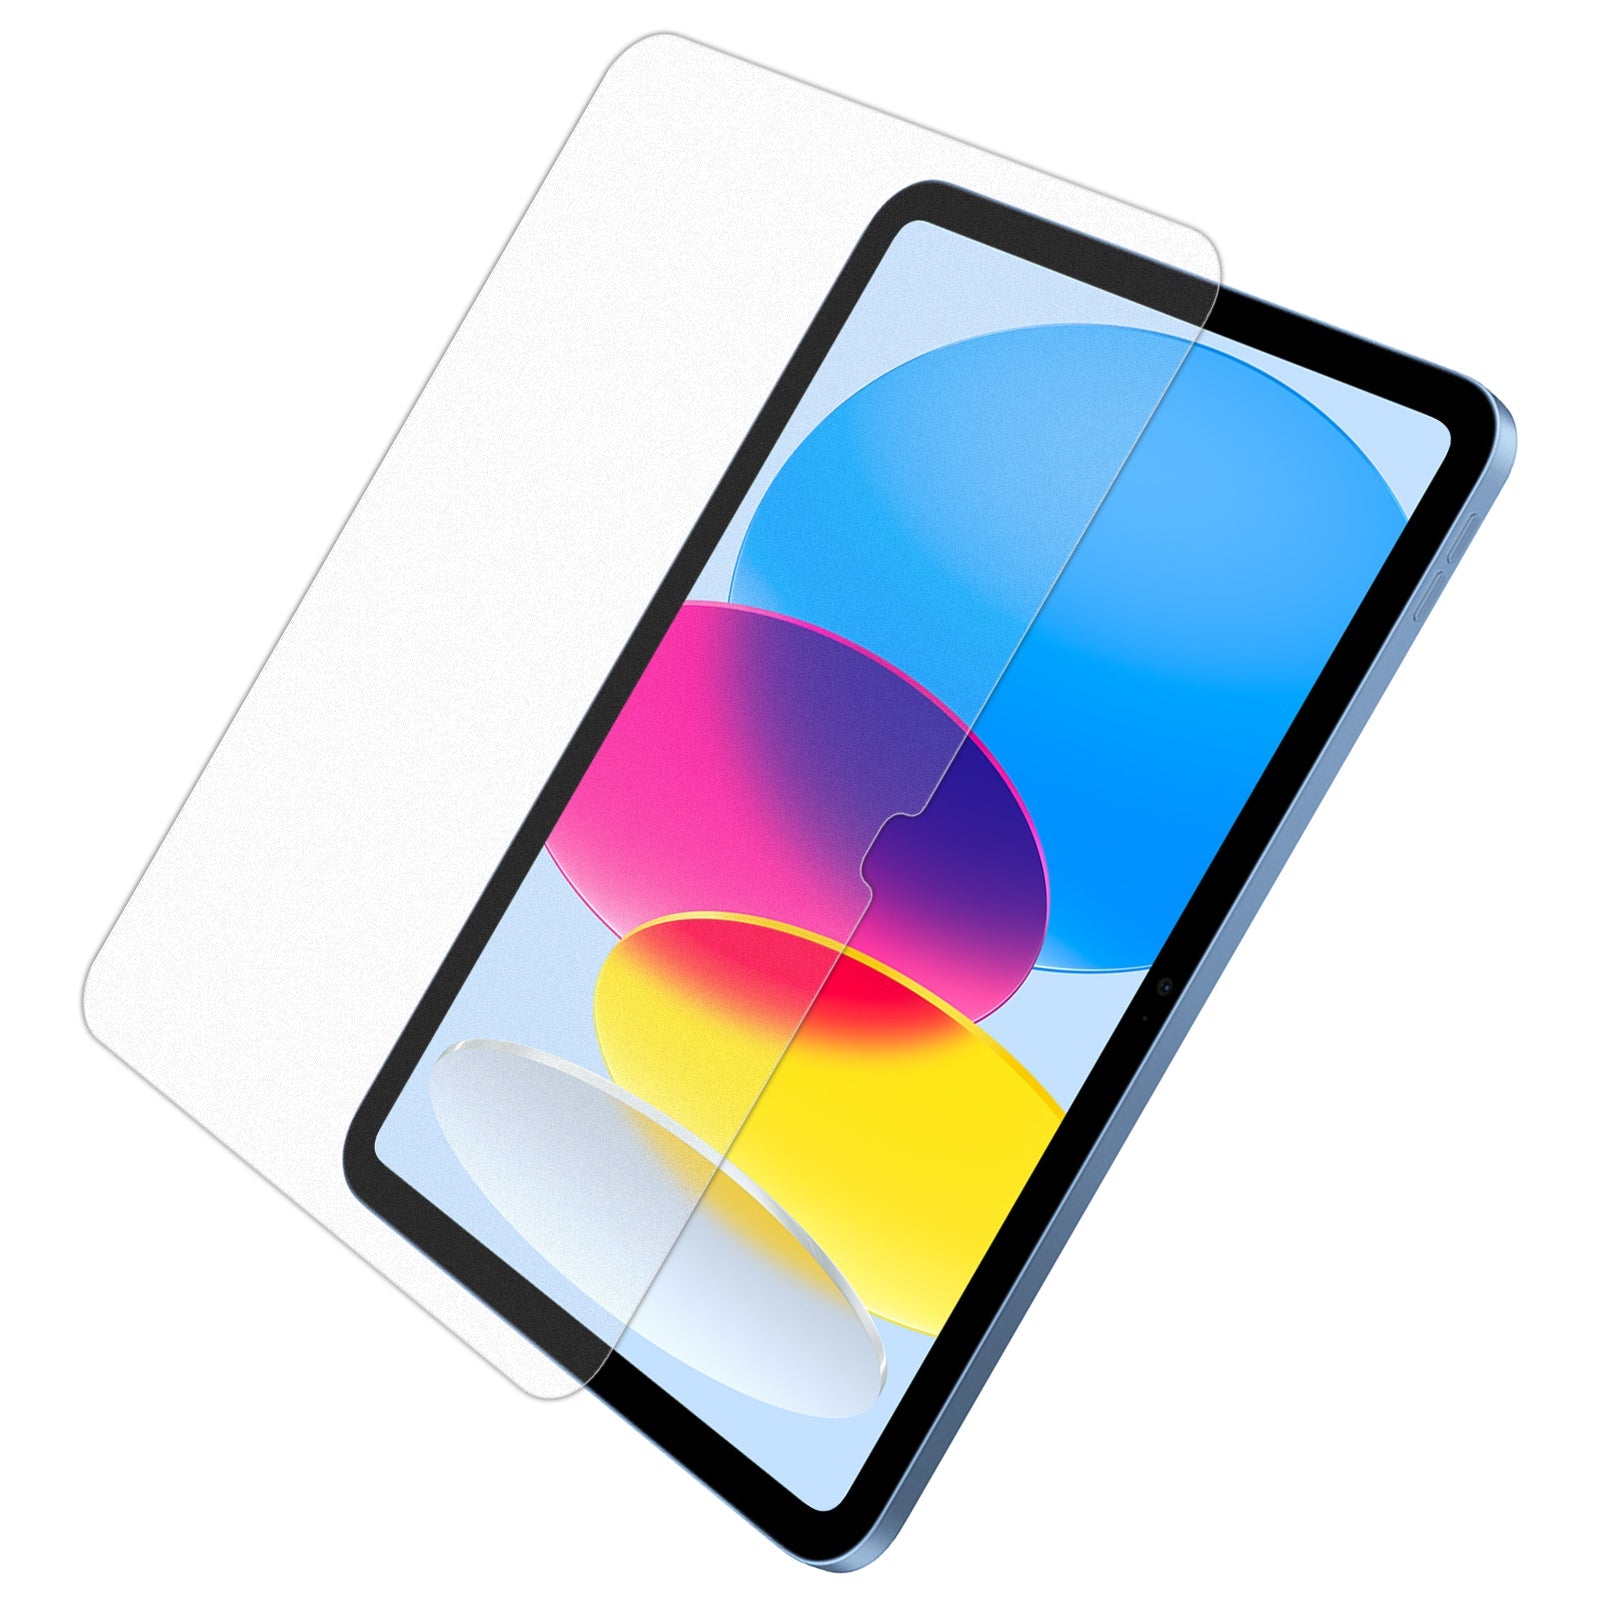 AG Paper-like Screen Protector for iPad Series